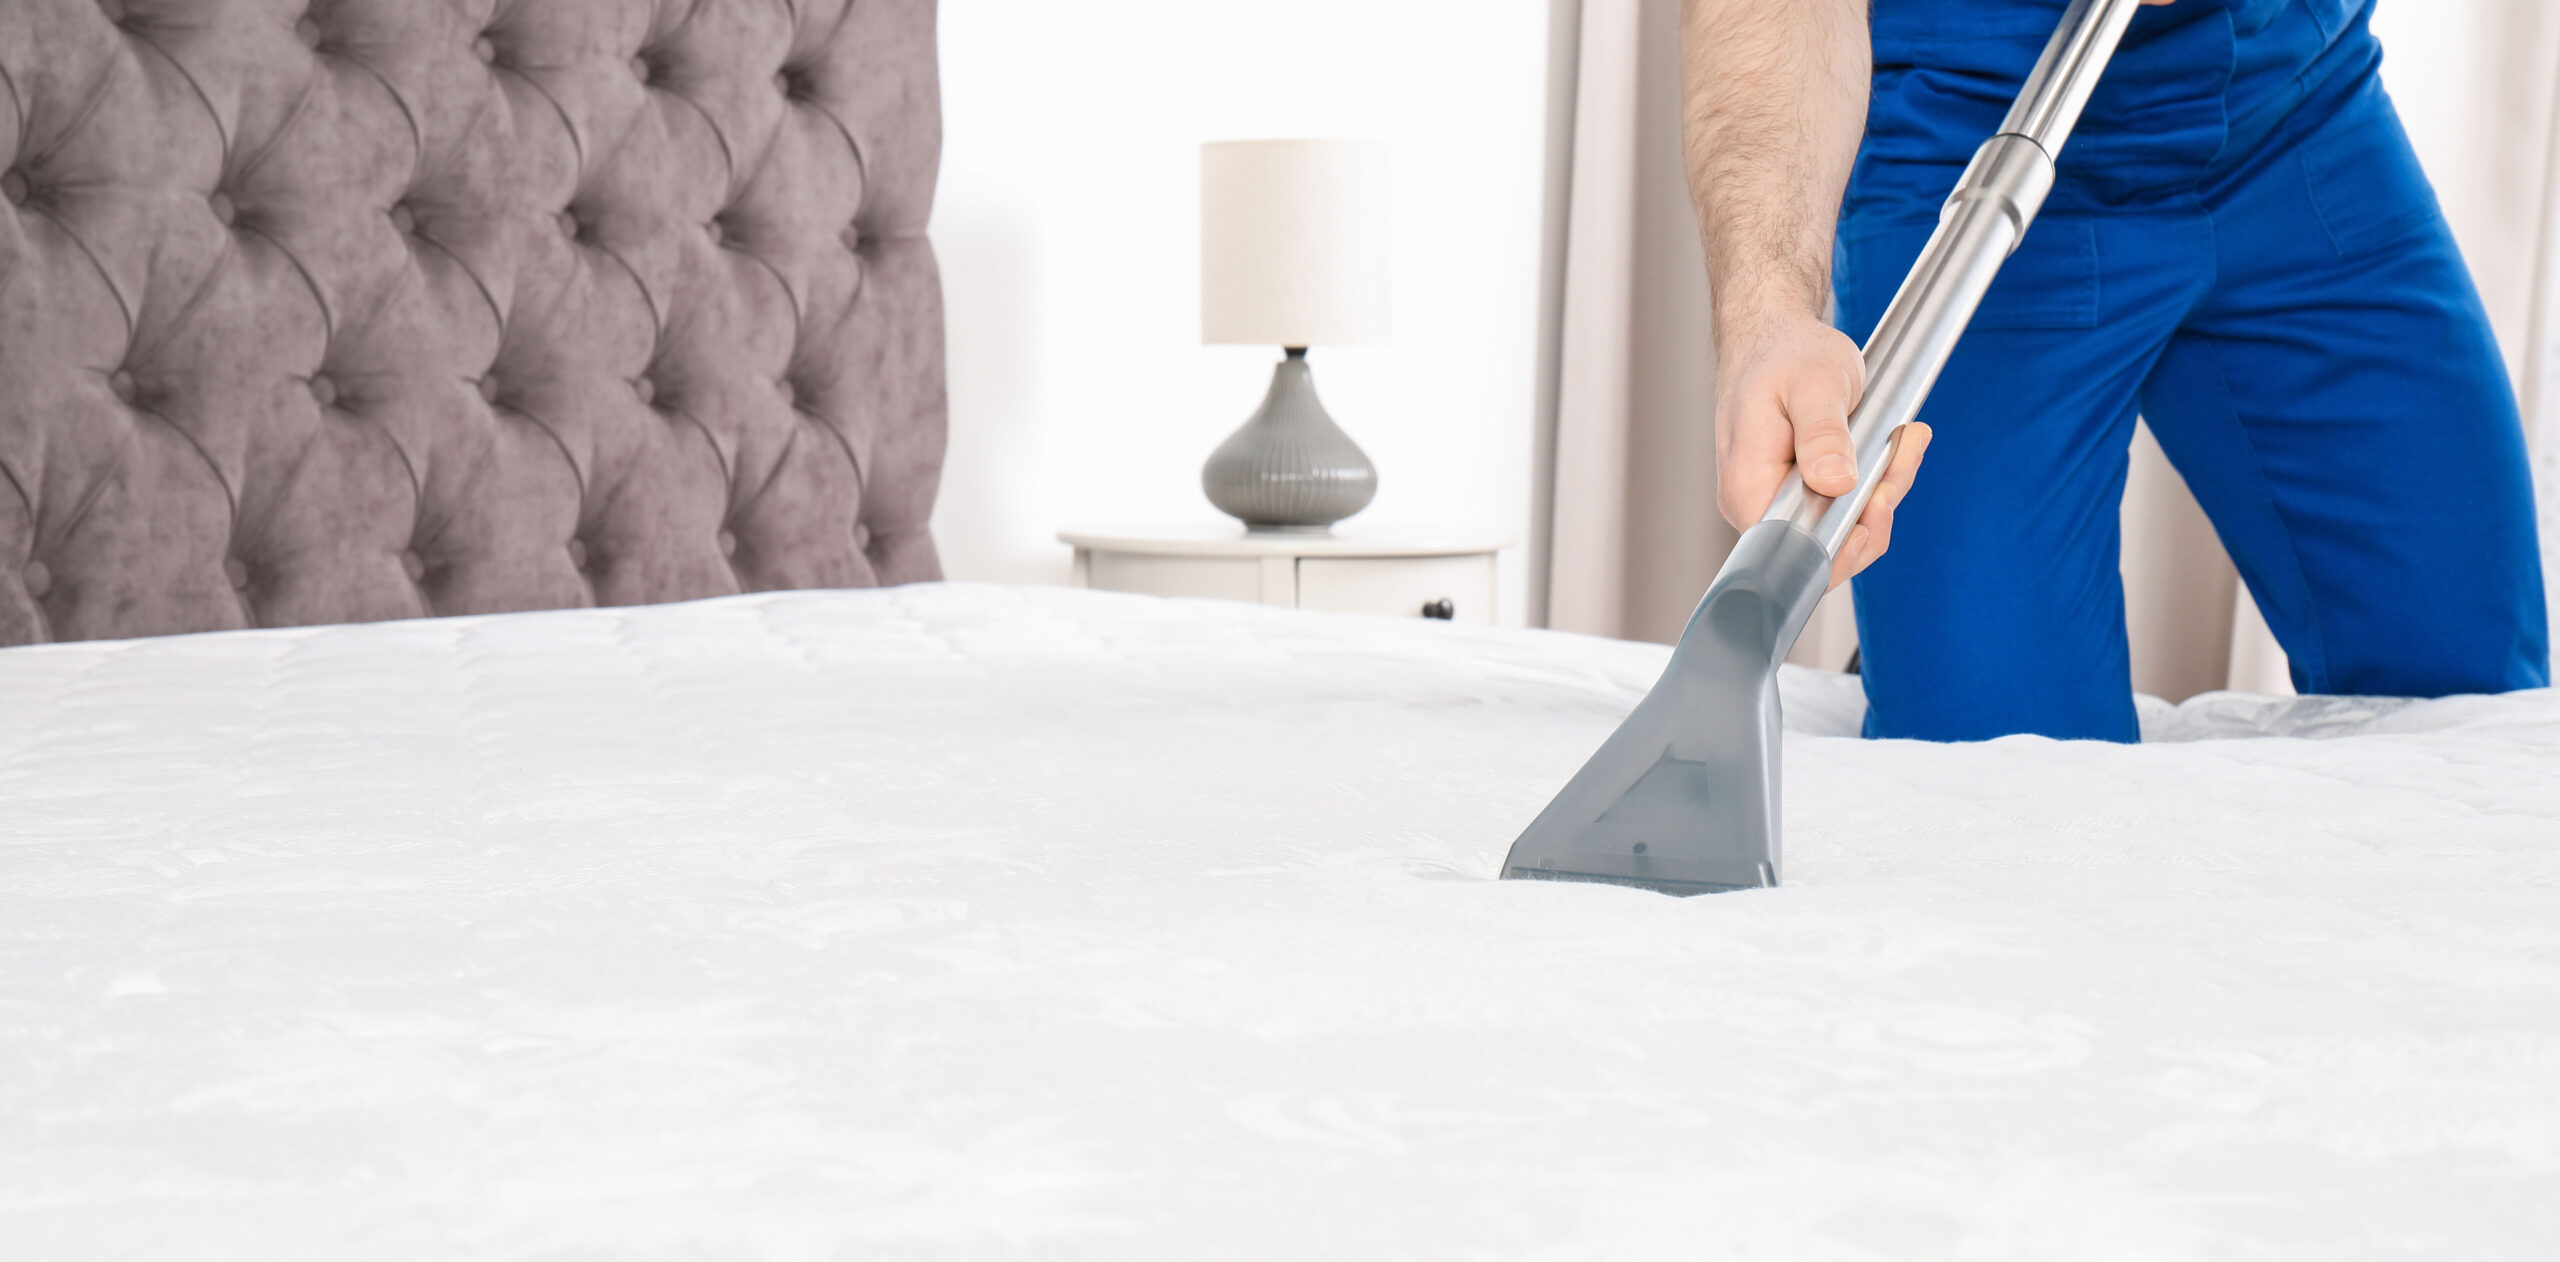 Mattress Cleaning Service in Miami - Professional Mattress Cleaner Near Me